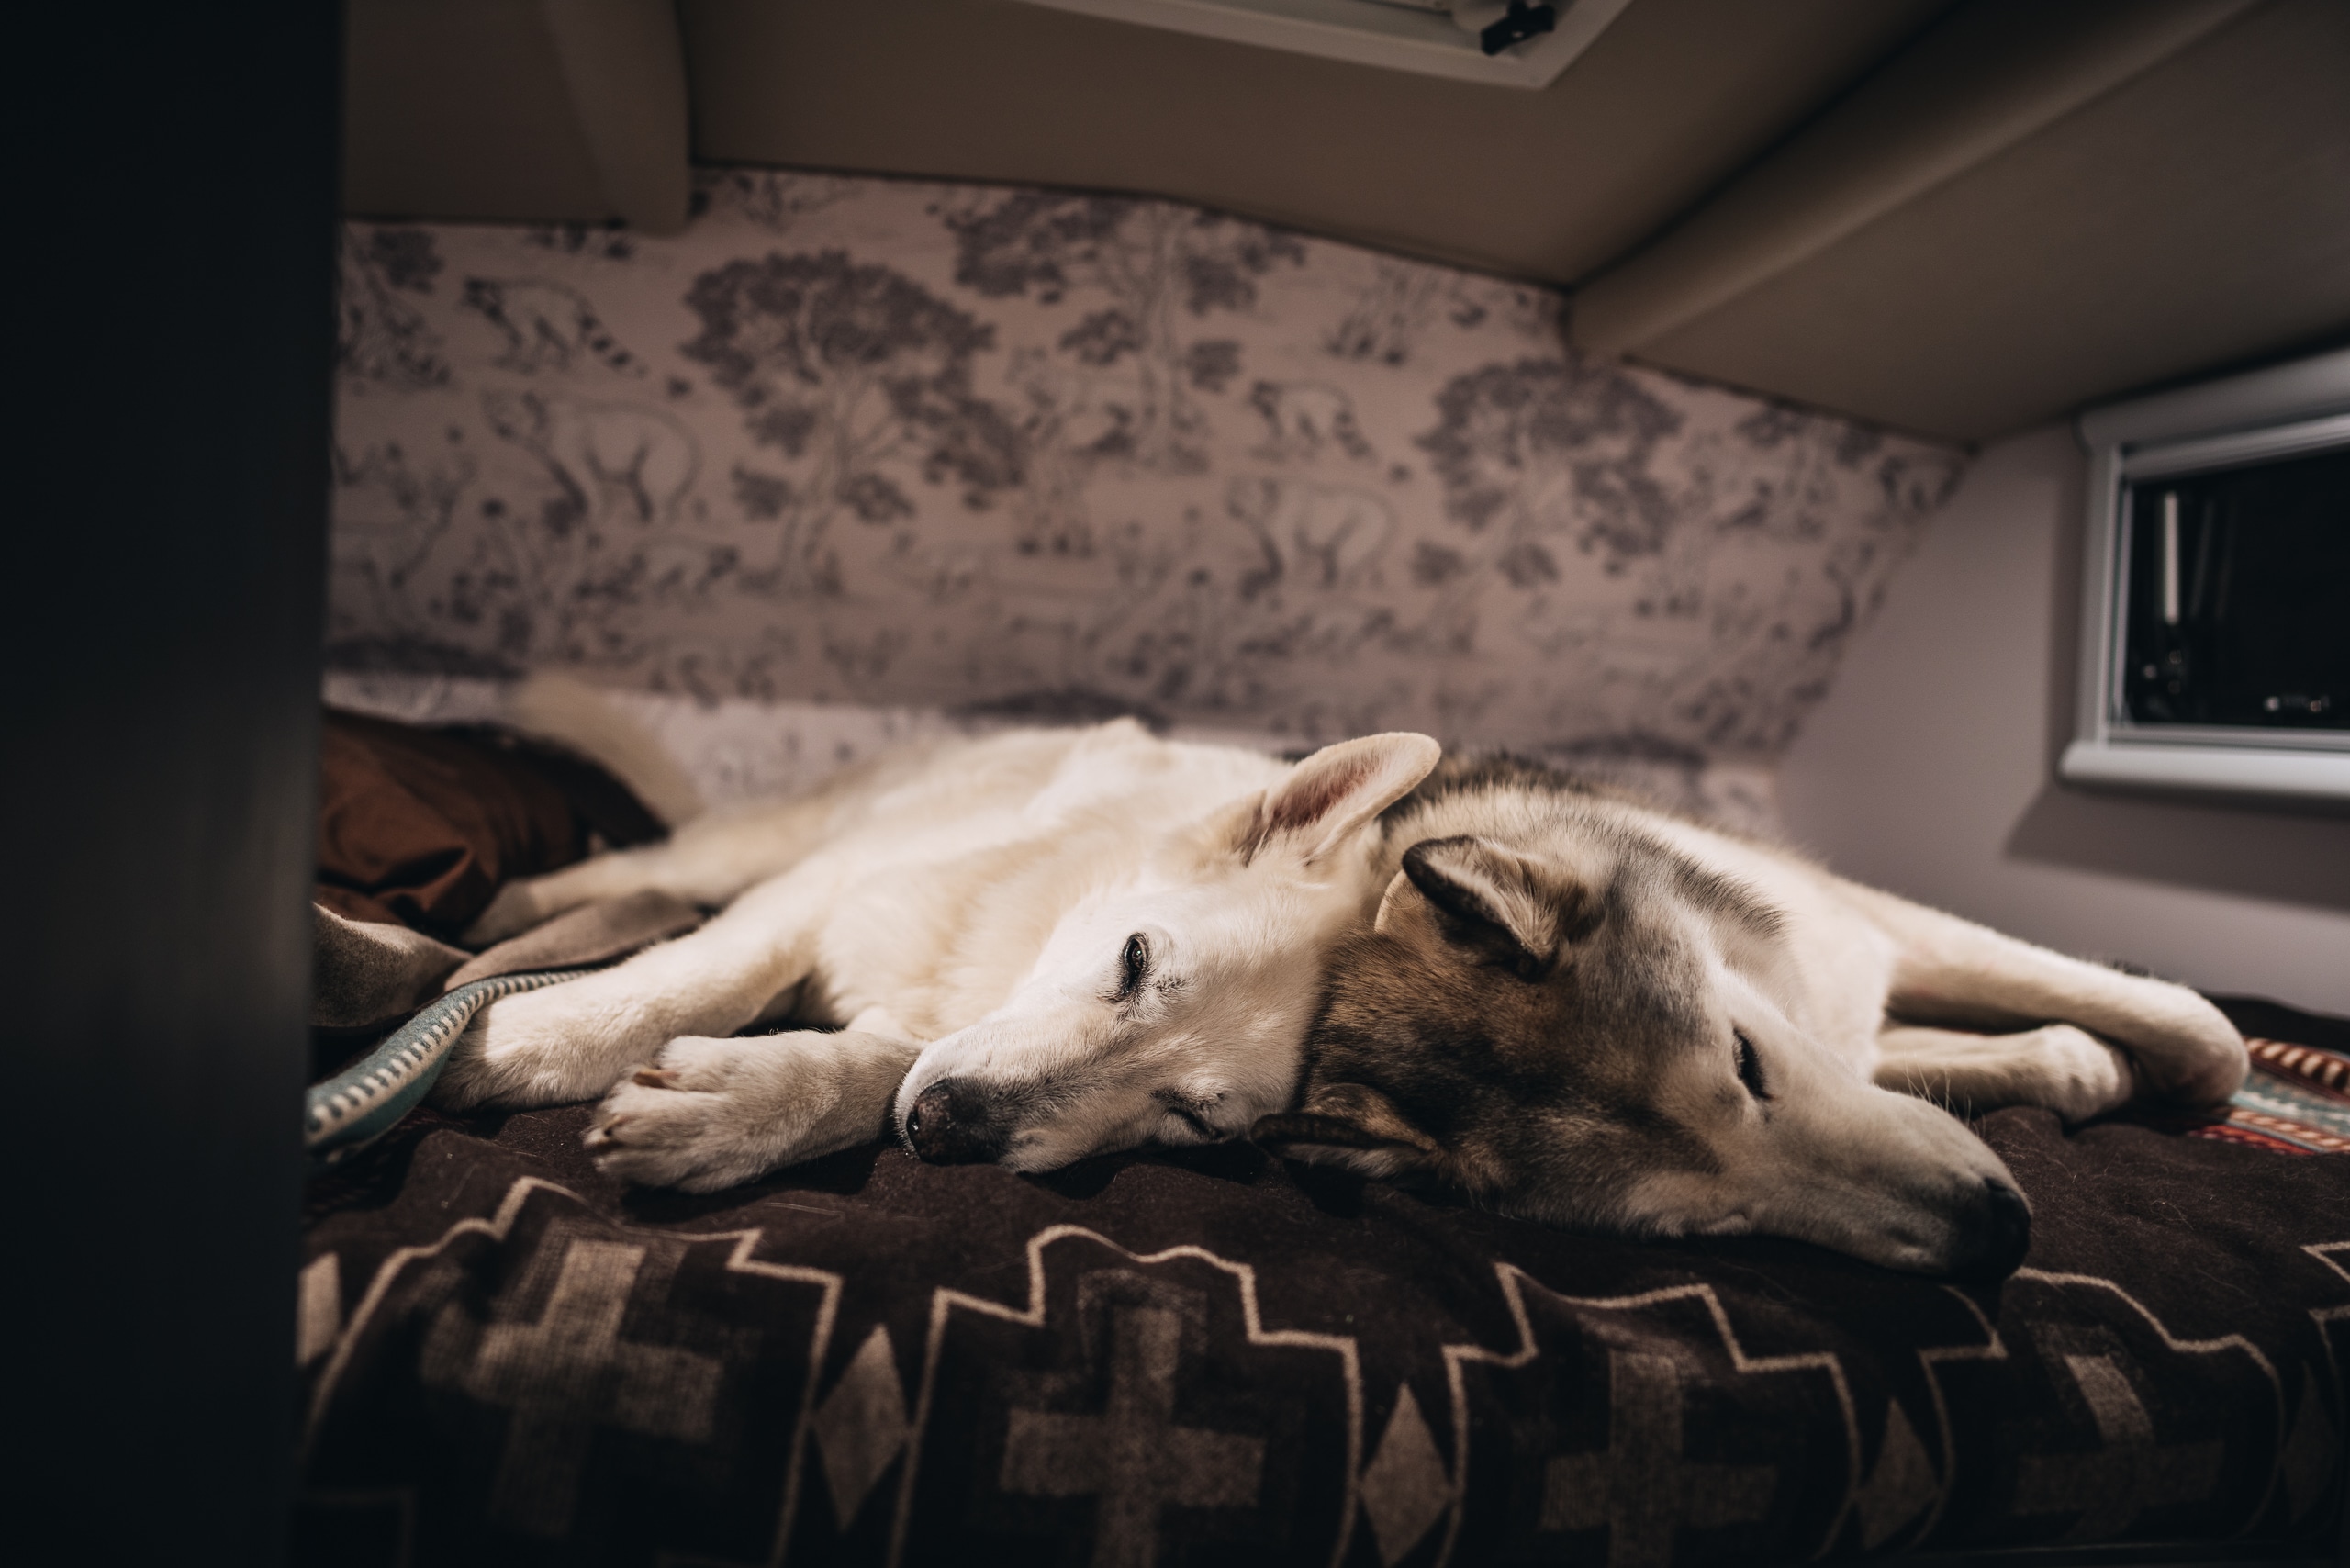 Loki the Wolfdog and Raven in Kelly Lund's Truck Camper